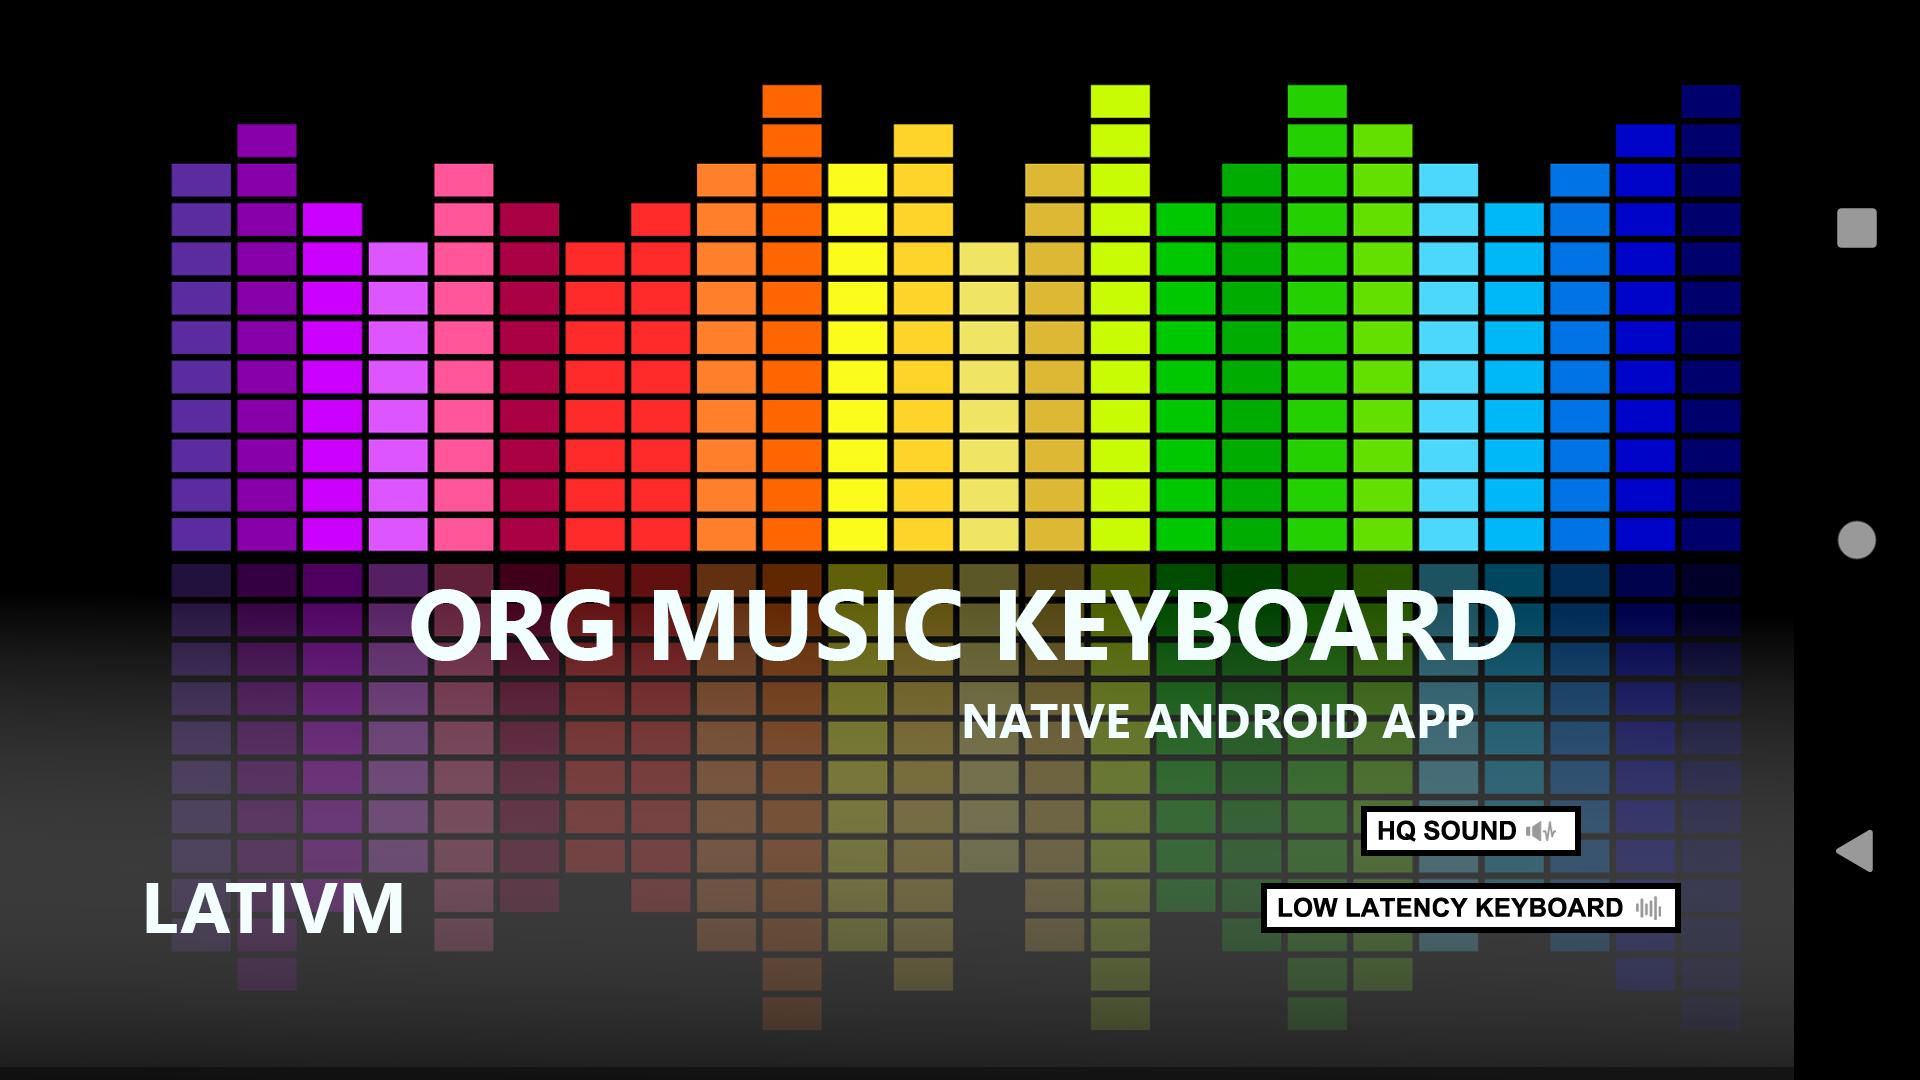 Https music org. Music Keyboard 2d. Org Music. Музыка орг. 15 "Keyboard Cat" Sound variations in 30 seconds.